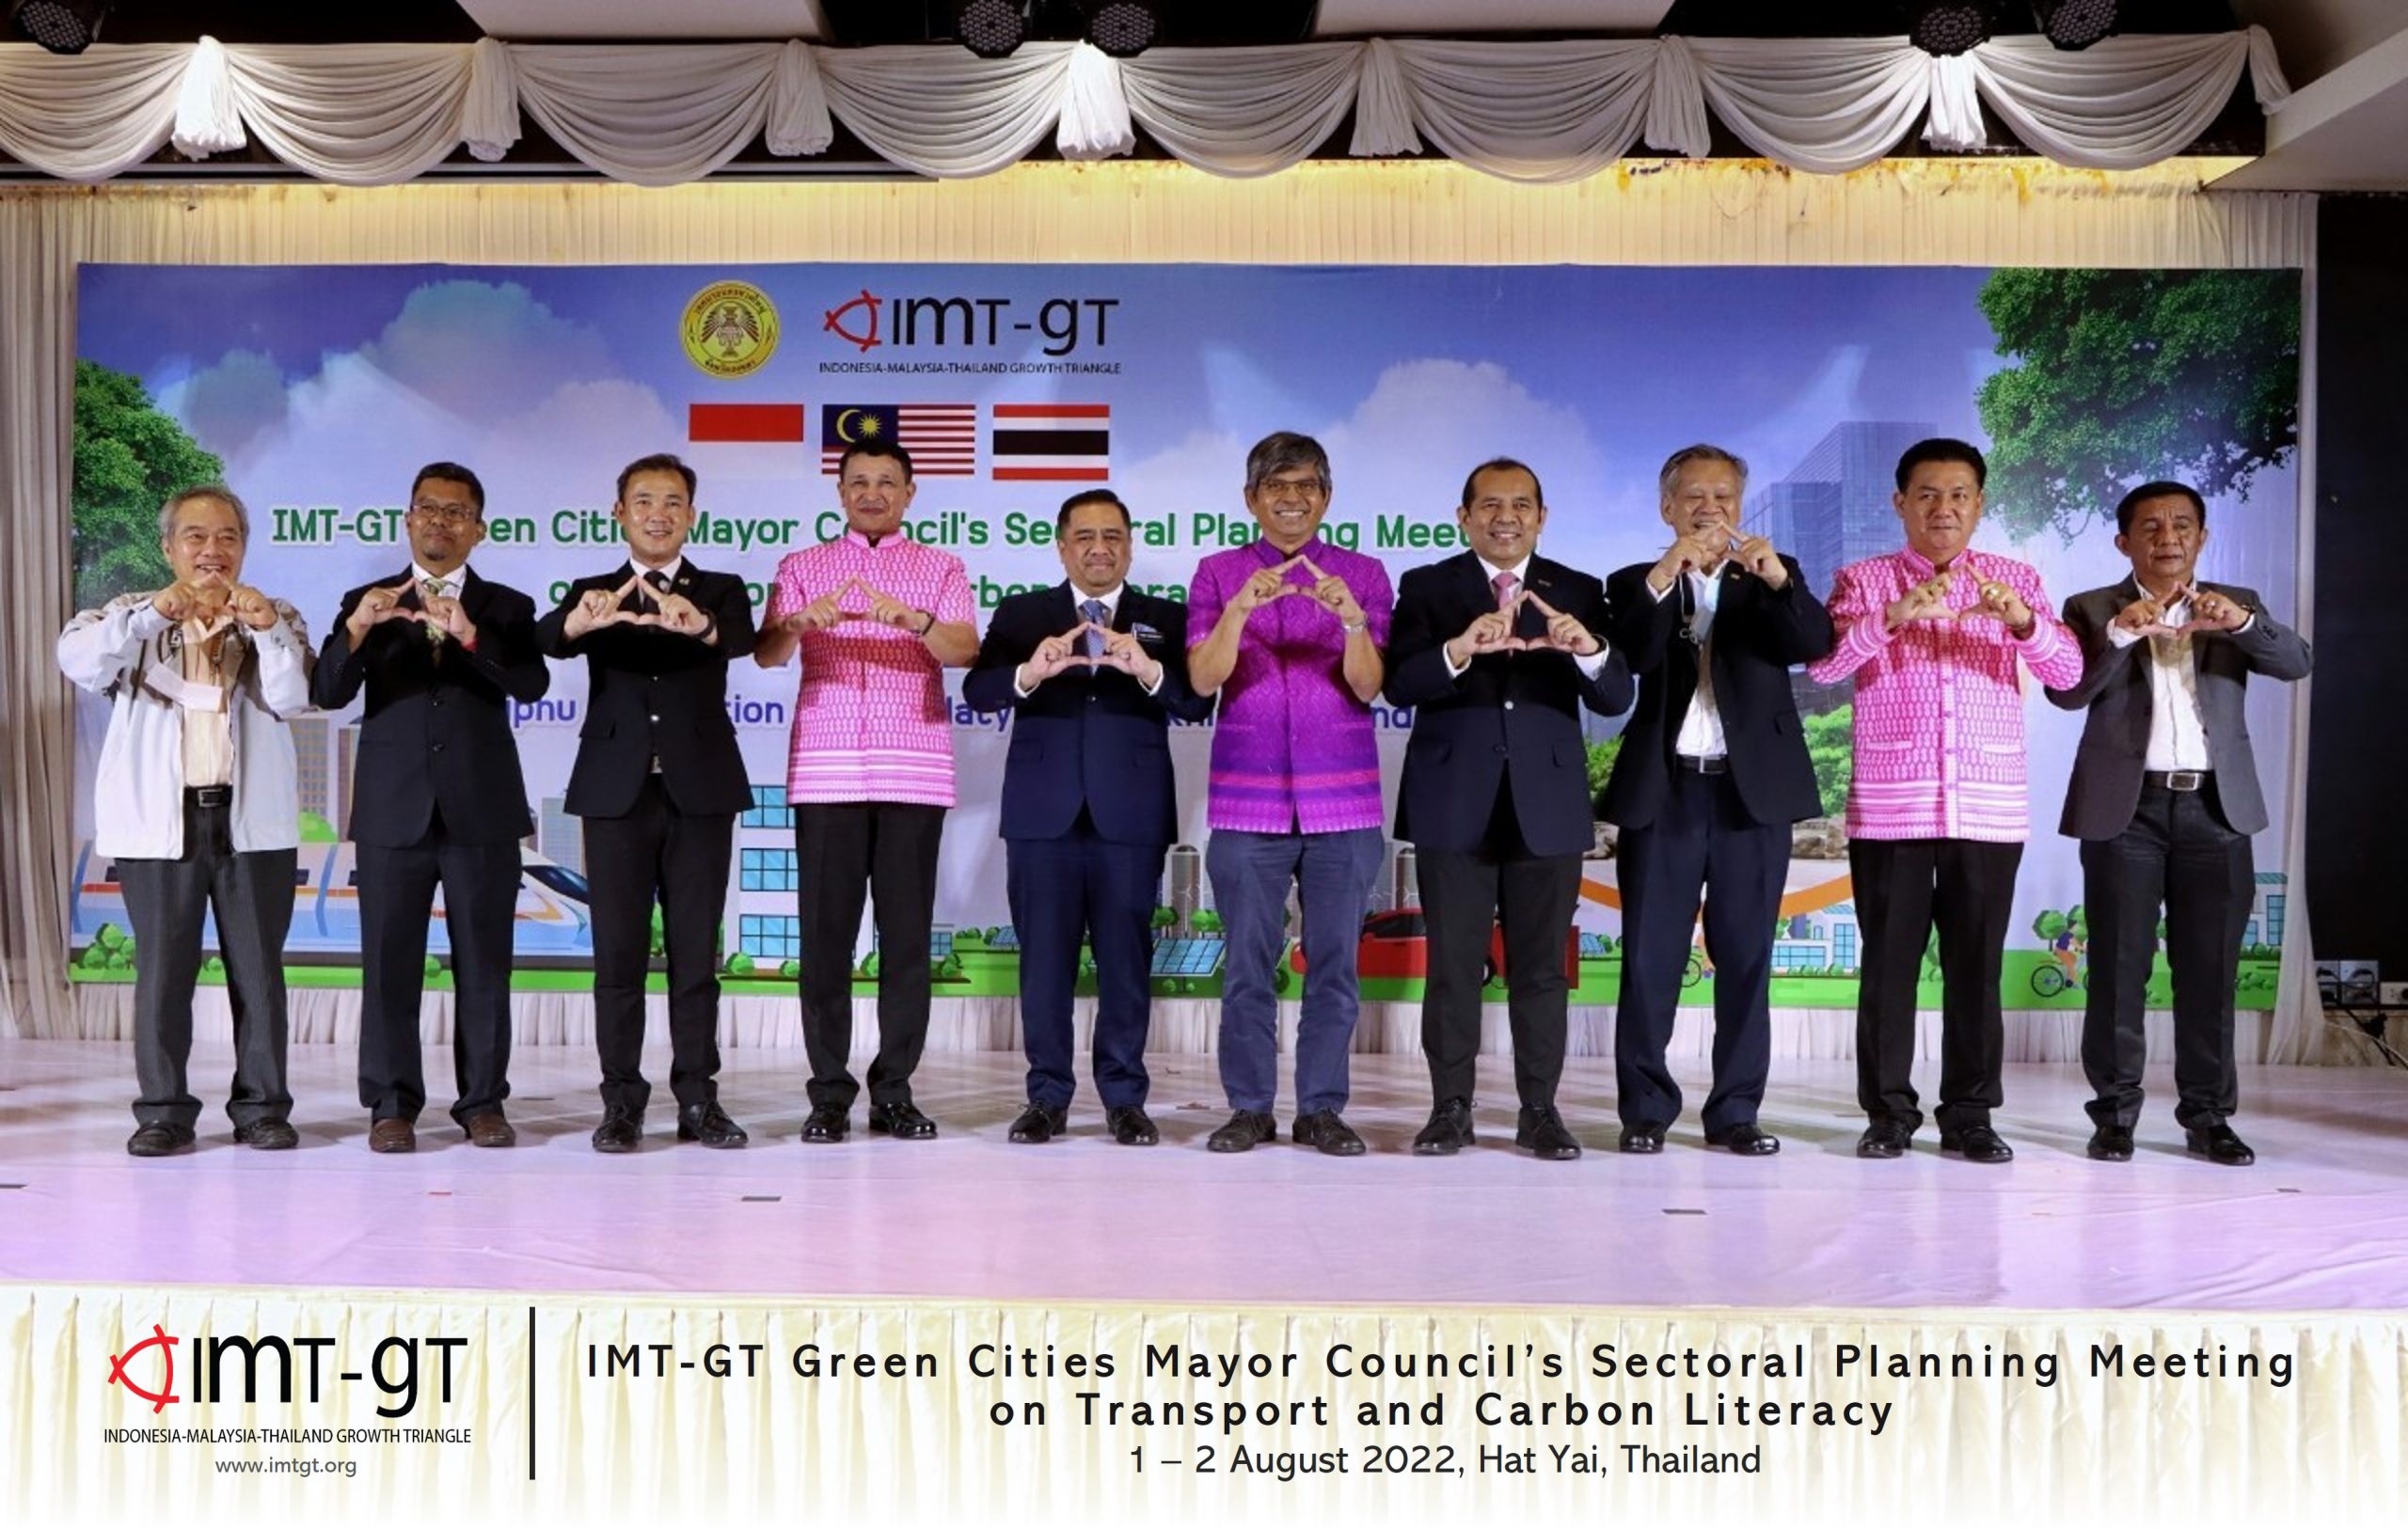 IMT-GT GREEN CITIES MAYOR COUNCIL’S SECTORAL PLANNING MEETING ON TRANSPORT AND CARBON LITERACY